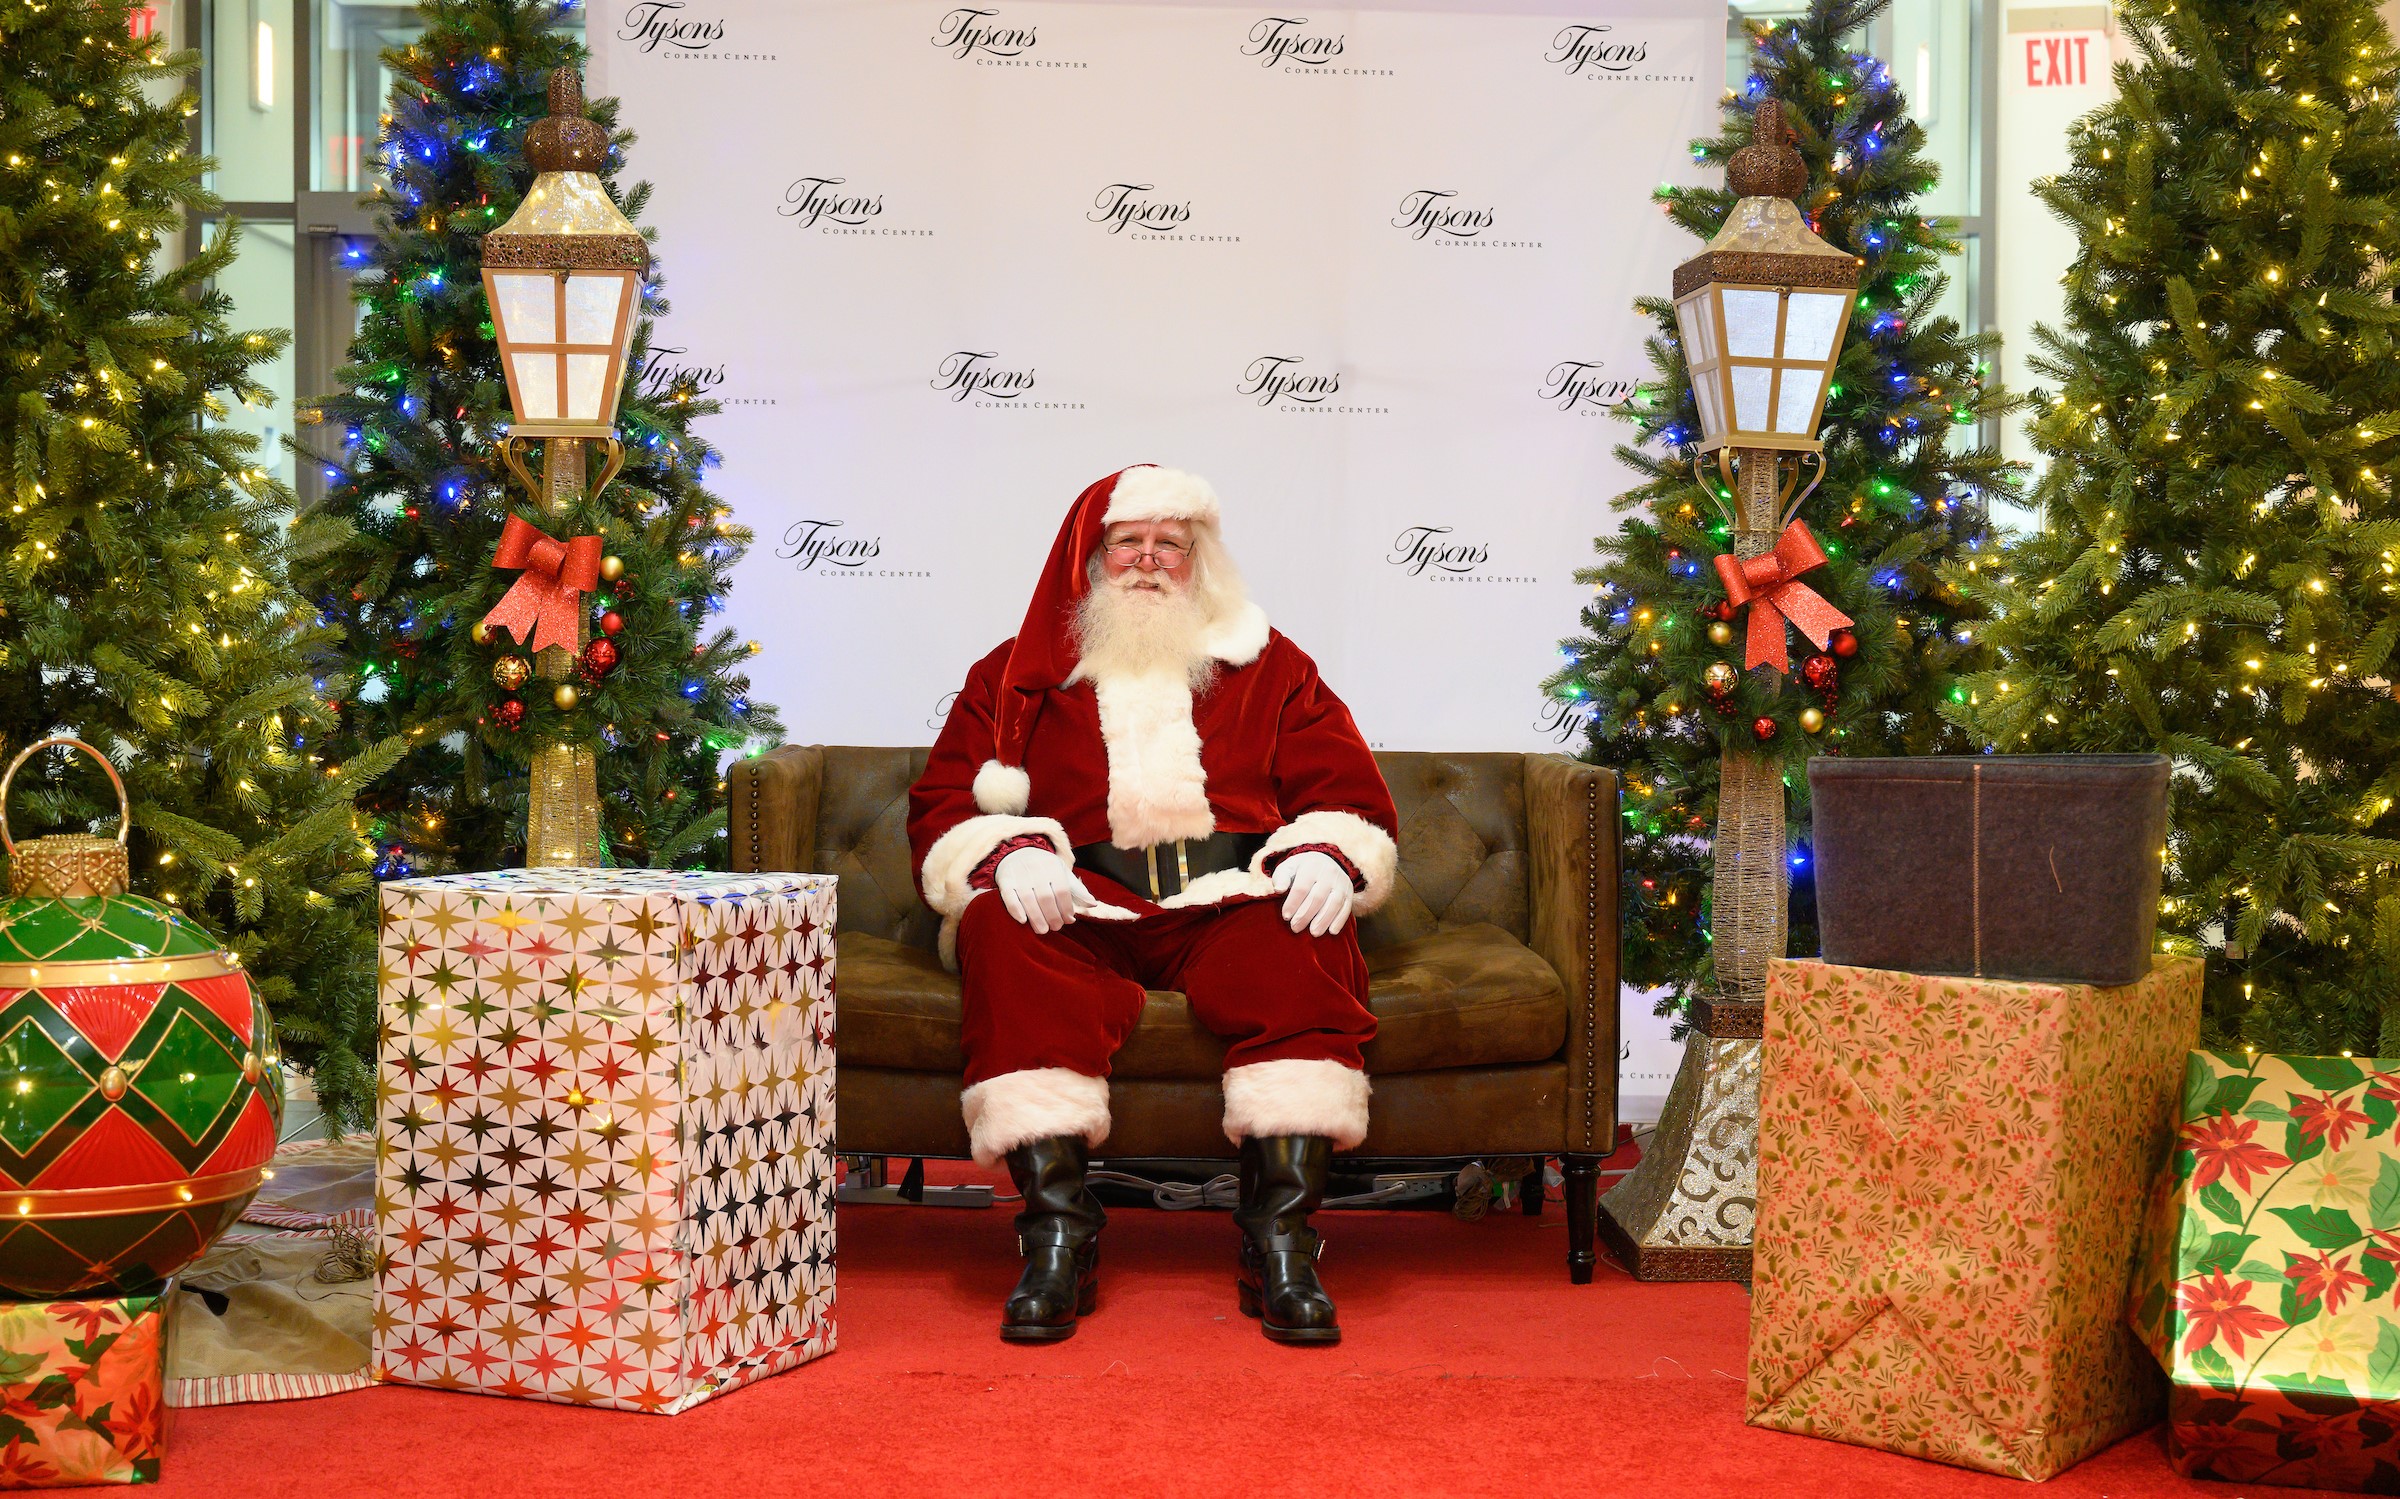 Santa seated in large chair surrounded by wrapped gifts and lit pine trees